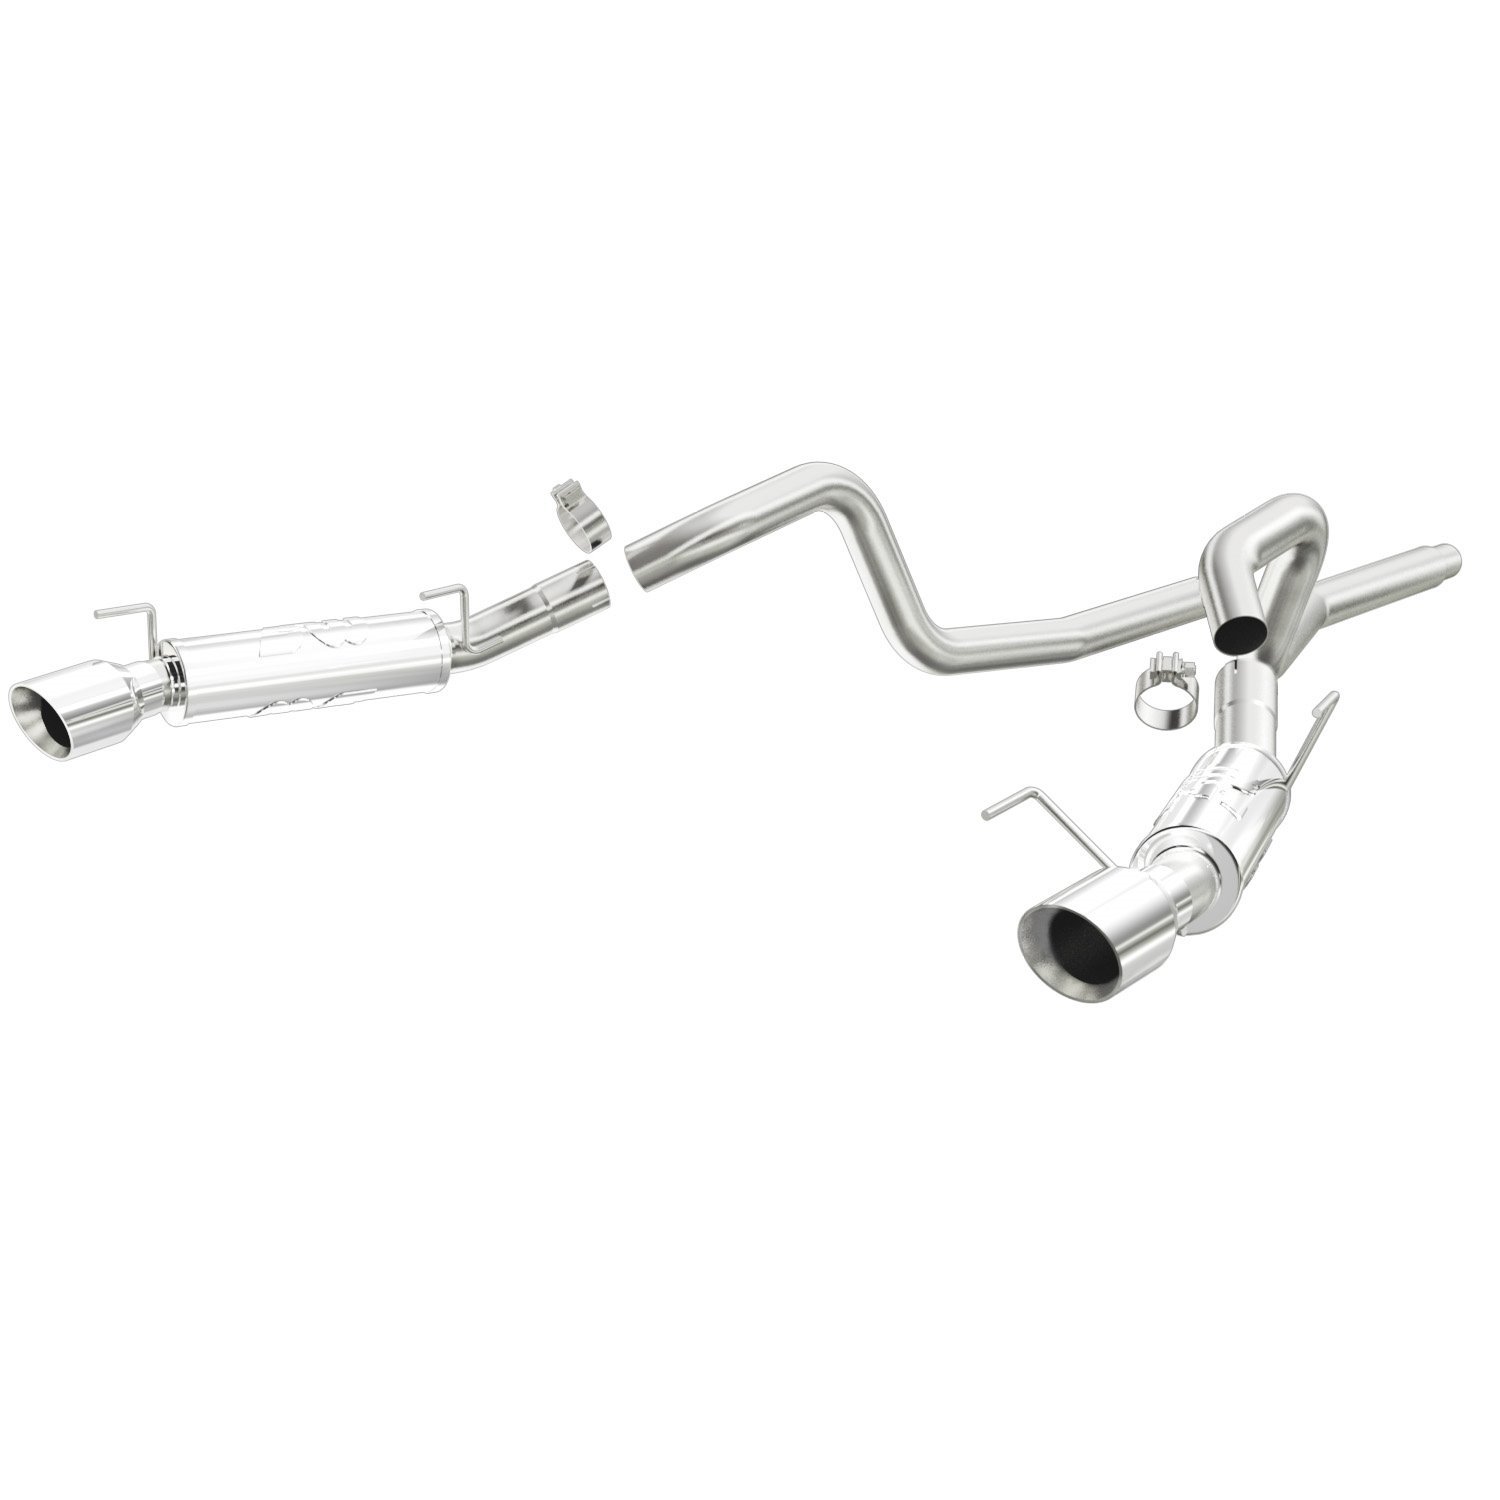 Complete Exhaust System without Catalytic Converters 2005-09 Mustang GT Includes: